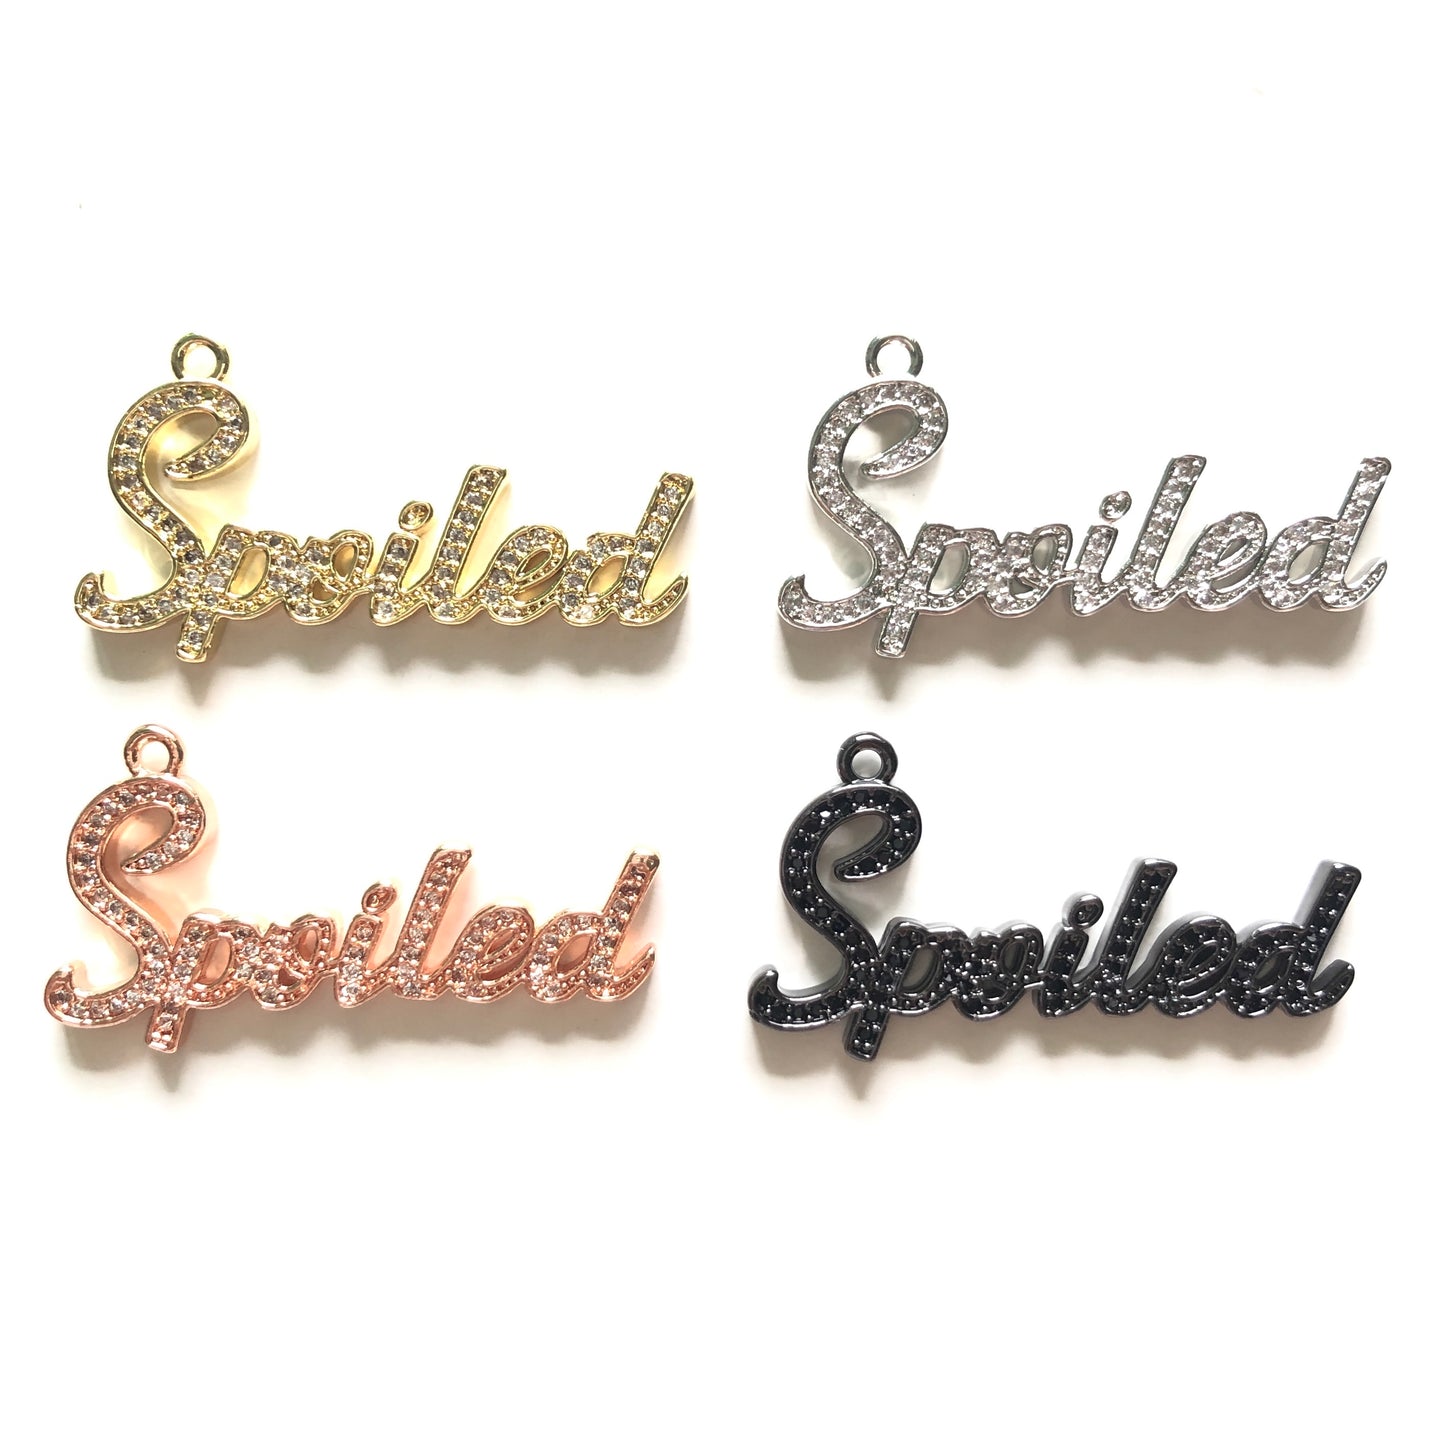 10pcs/lot 38*20.5mm CZ Paved Spoiled Charms CZ Paved Charms Words & Quotes Charms Beads Beyond